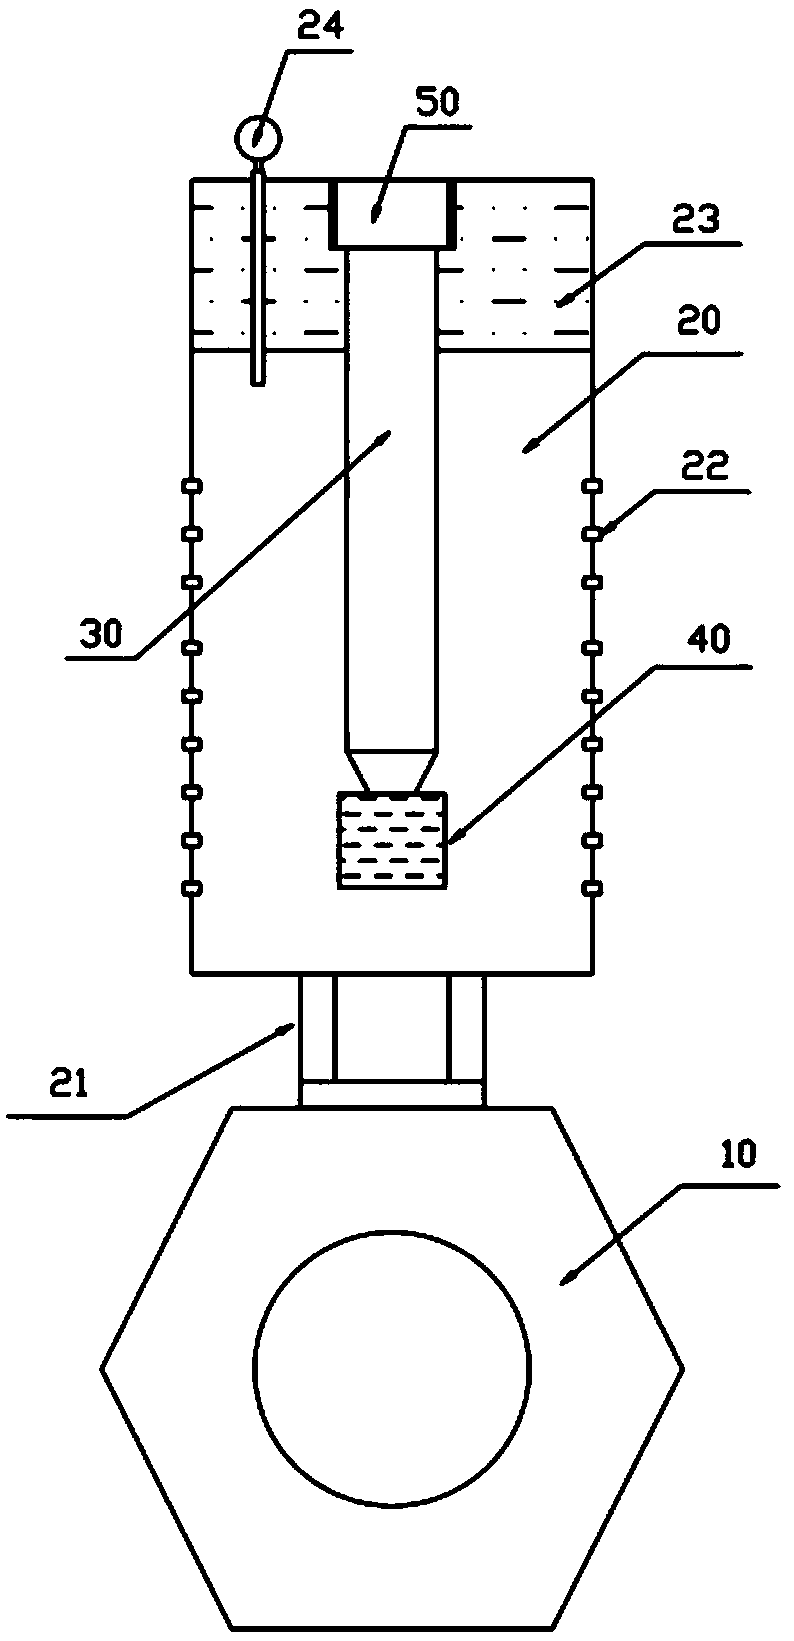 Multi-parameter collection and detection device for landfill gas